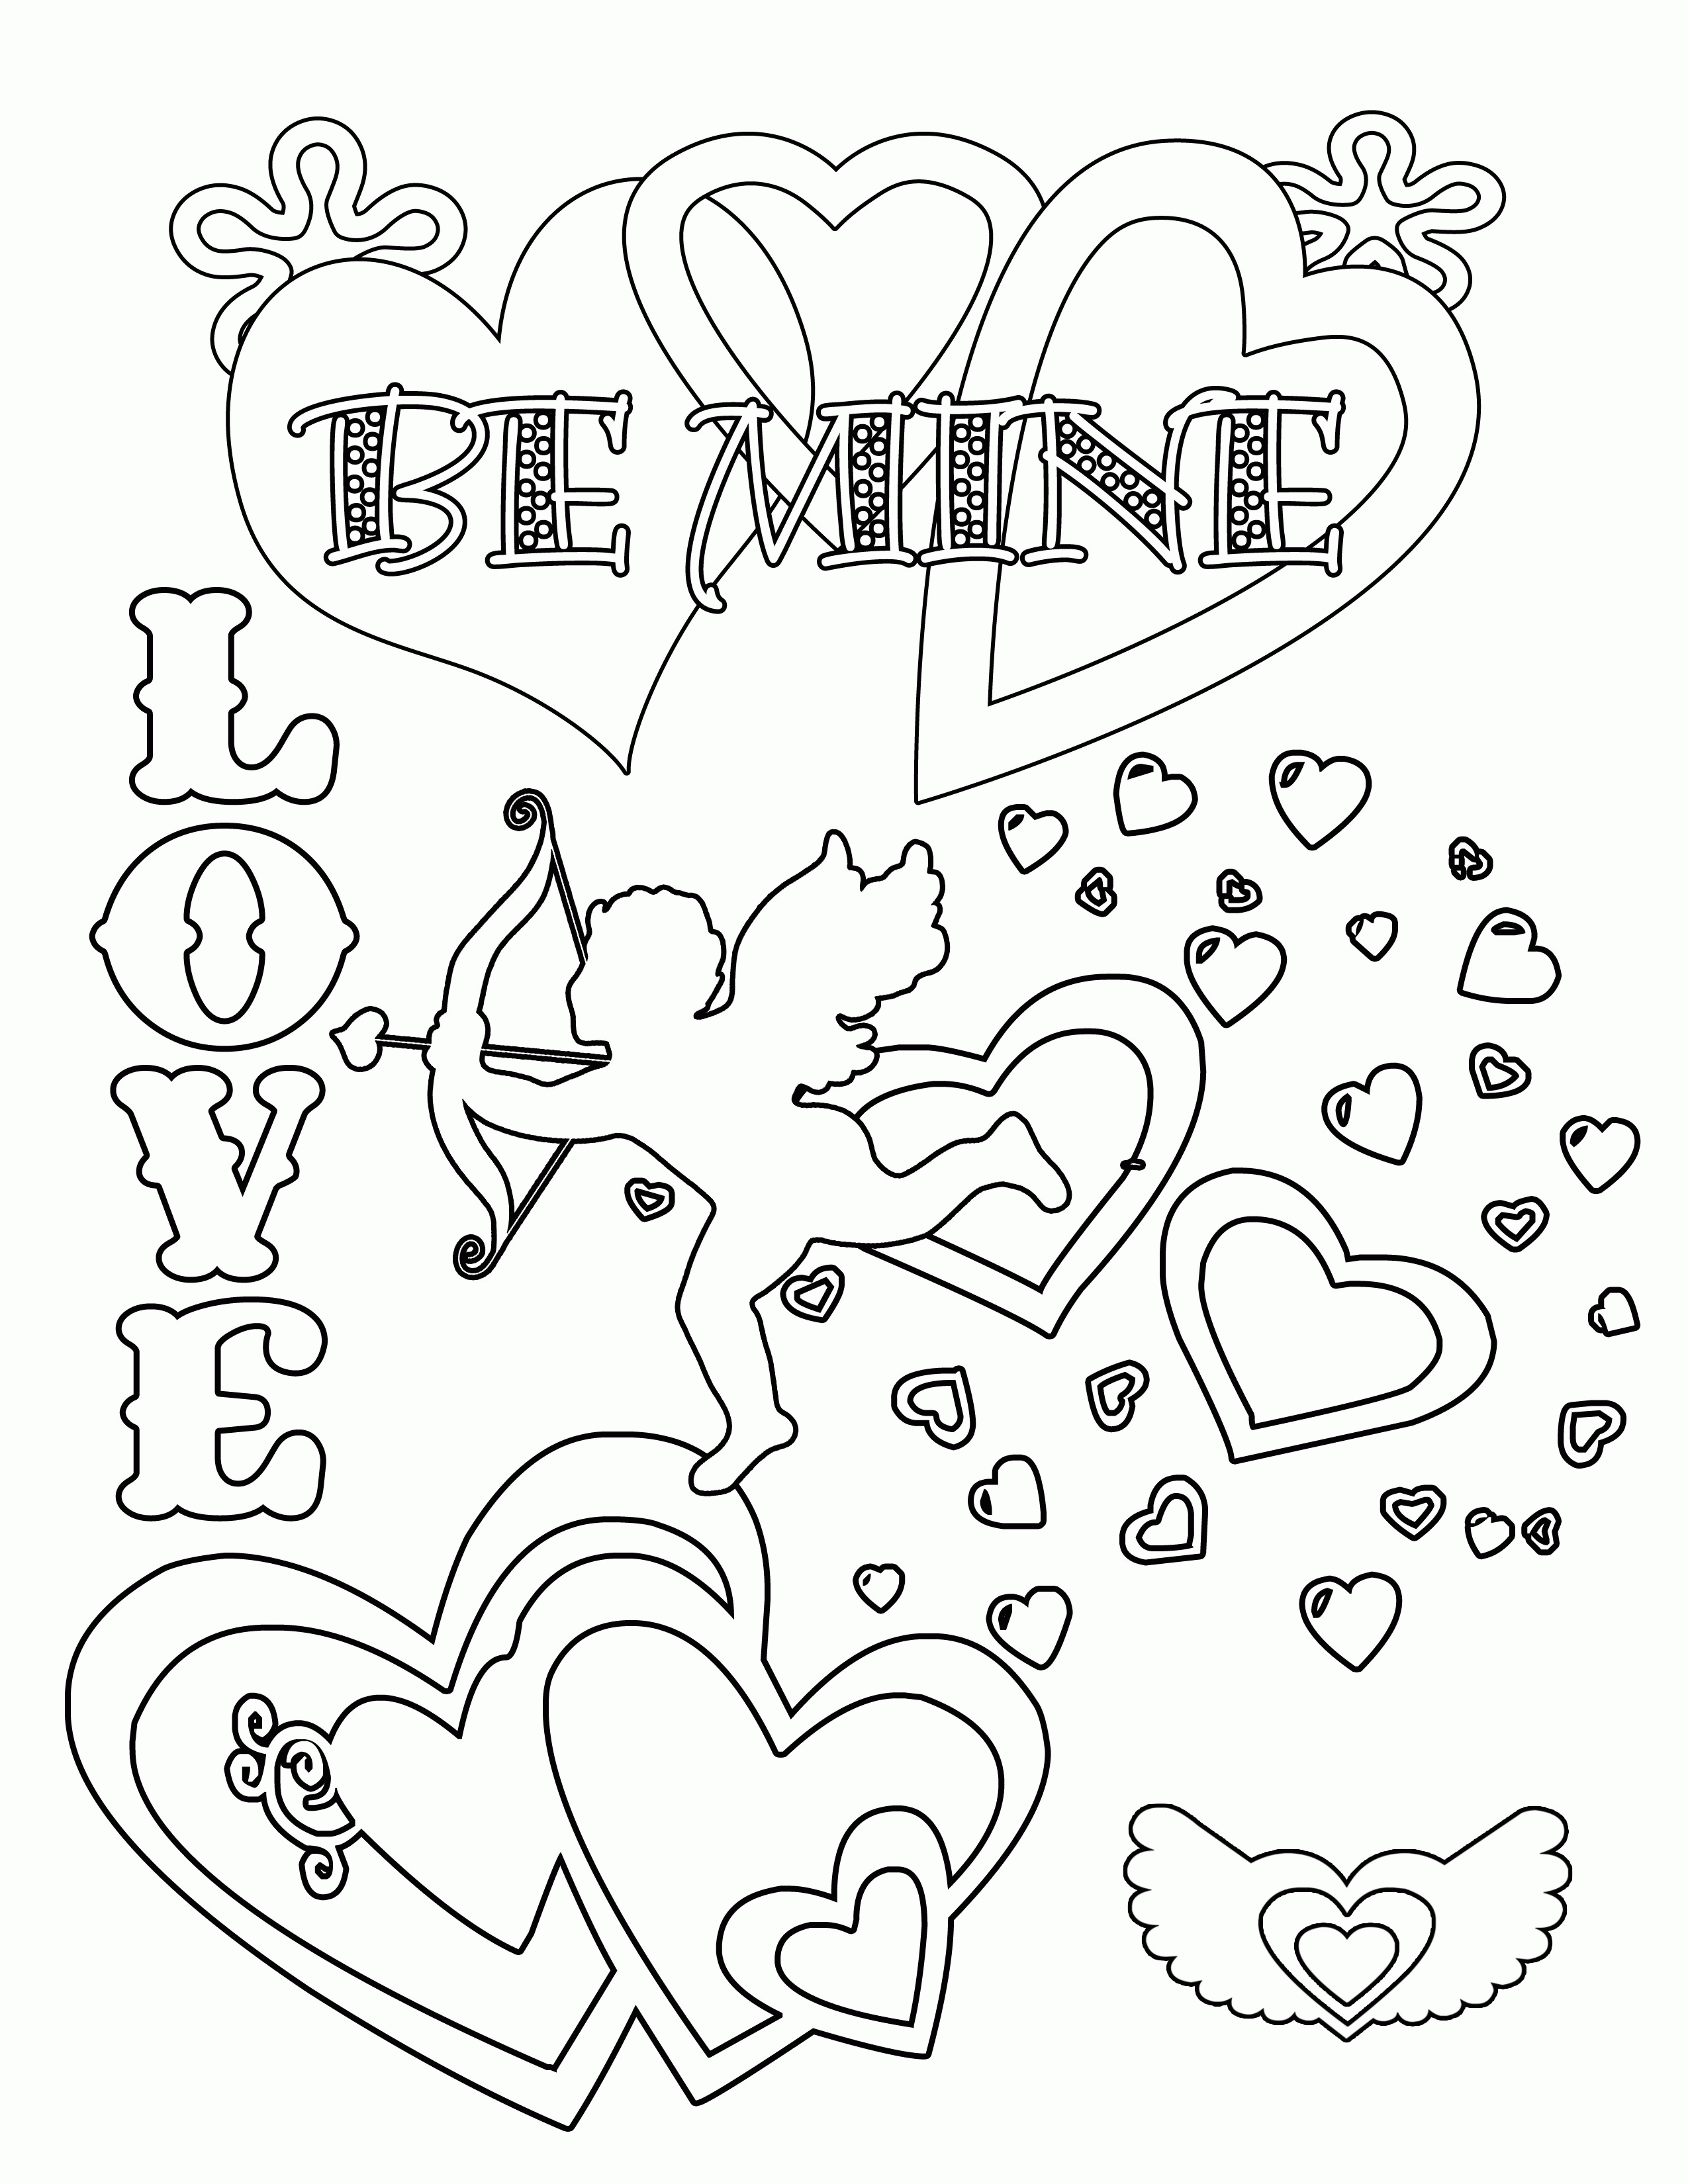 Teen Valentine Coloring Pages - Coloring Home